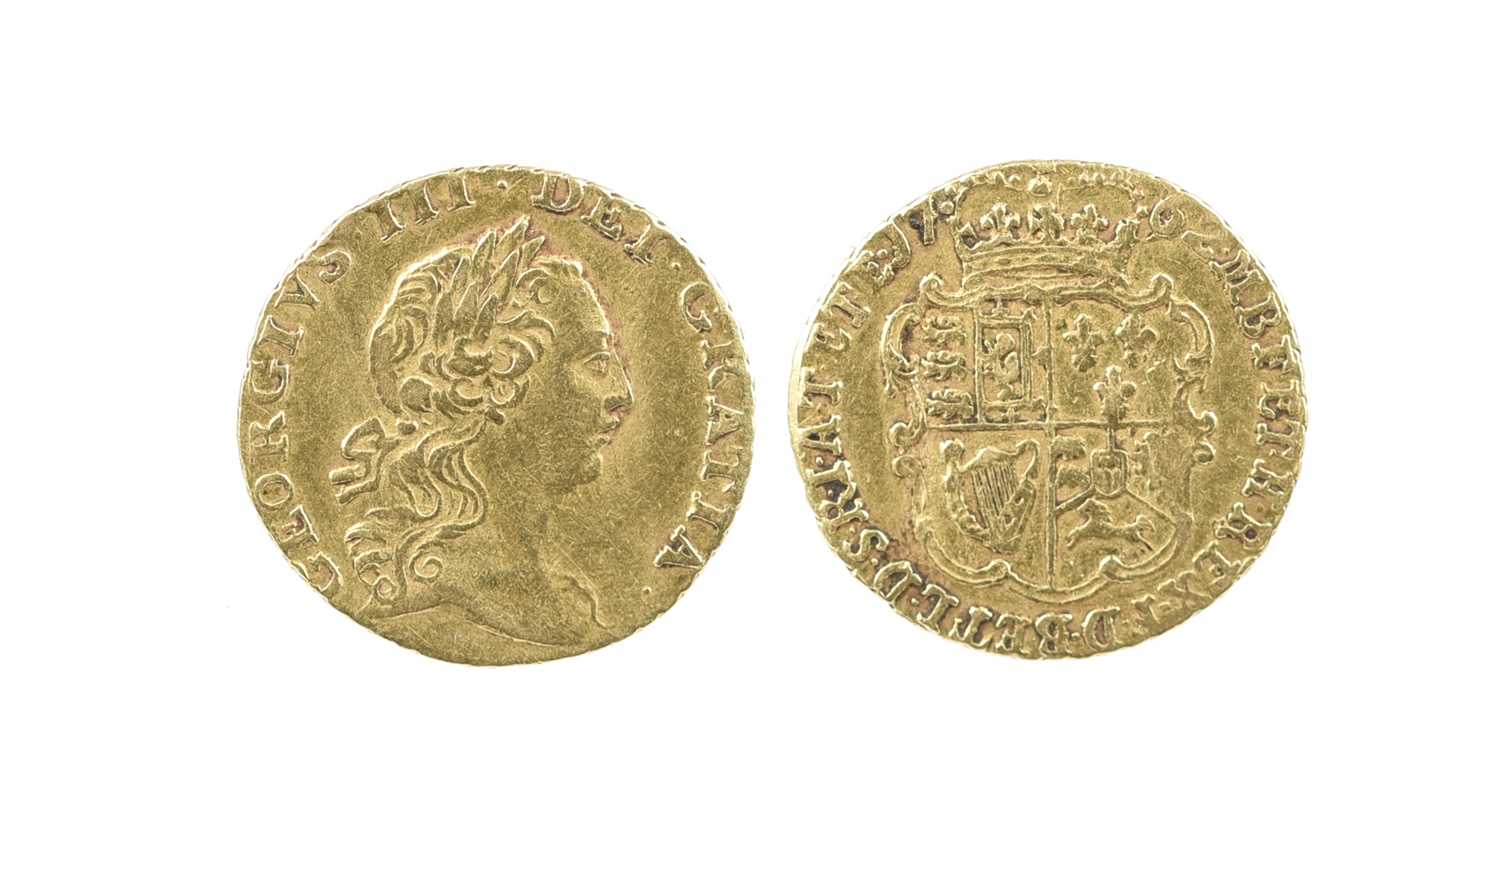 George III, gold quarter-guinea, 1762 (S 3741), appears slightly buckled, otherwise about very fine.